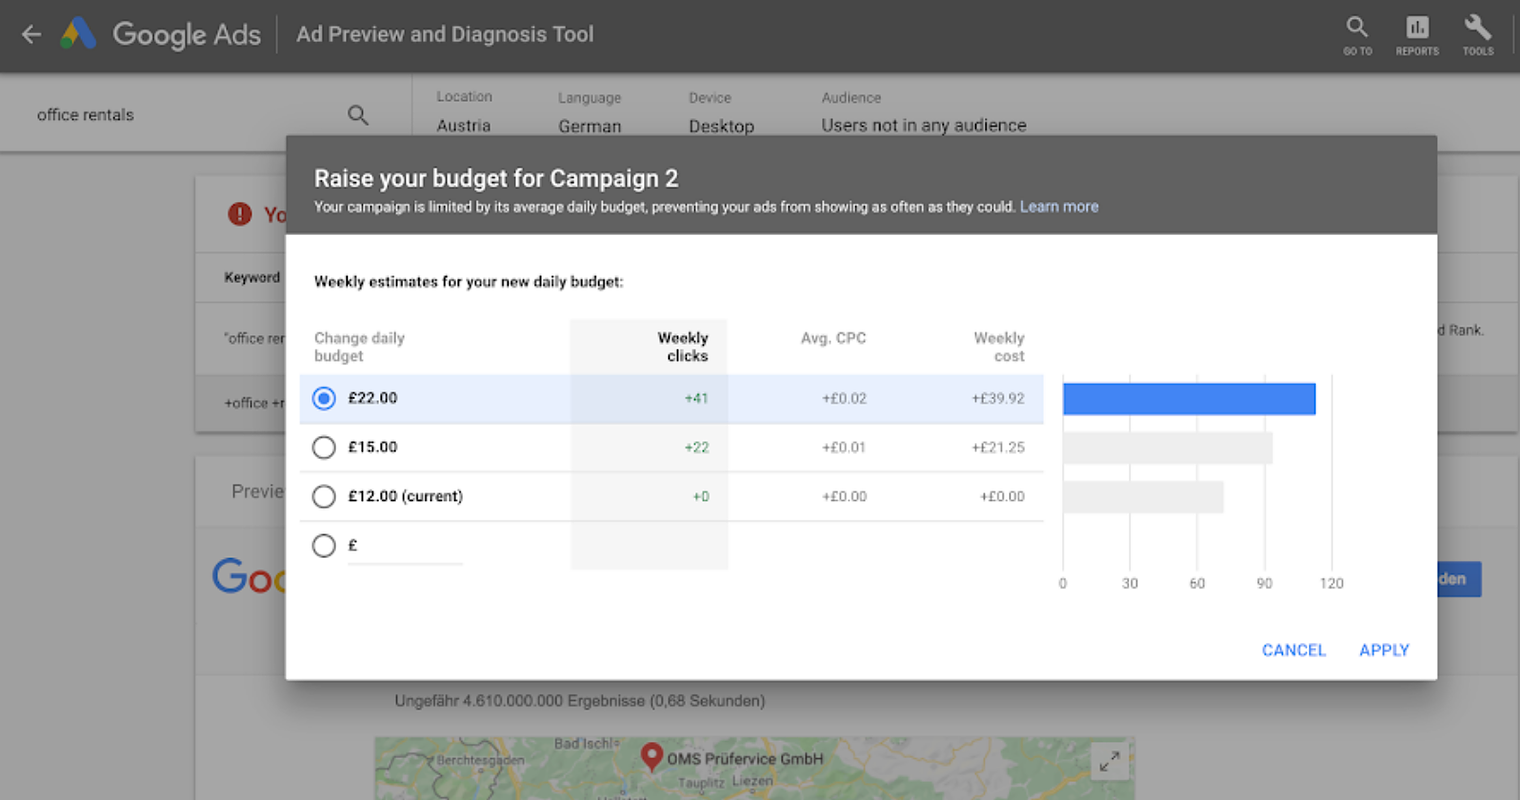 Google Ads Brings New Features to the Ad Preview and Diagnosis Tool